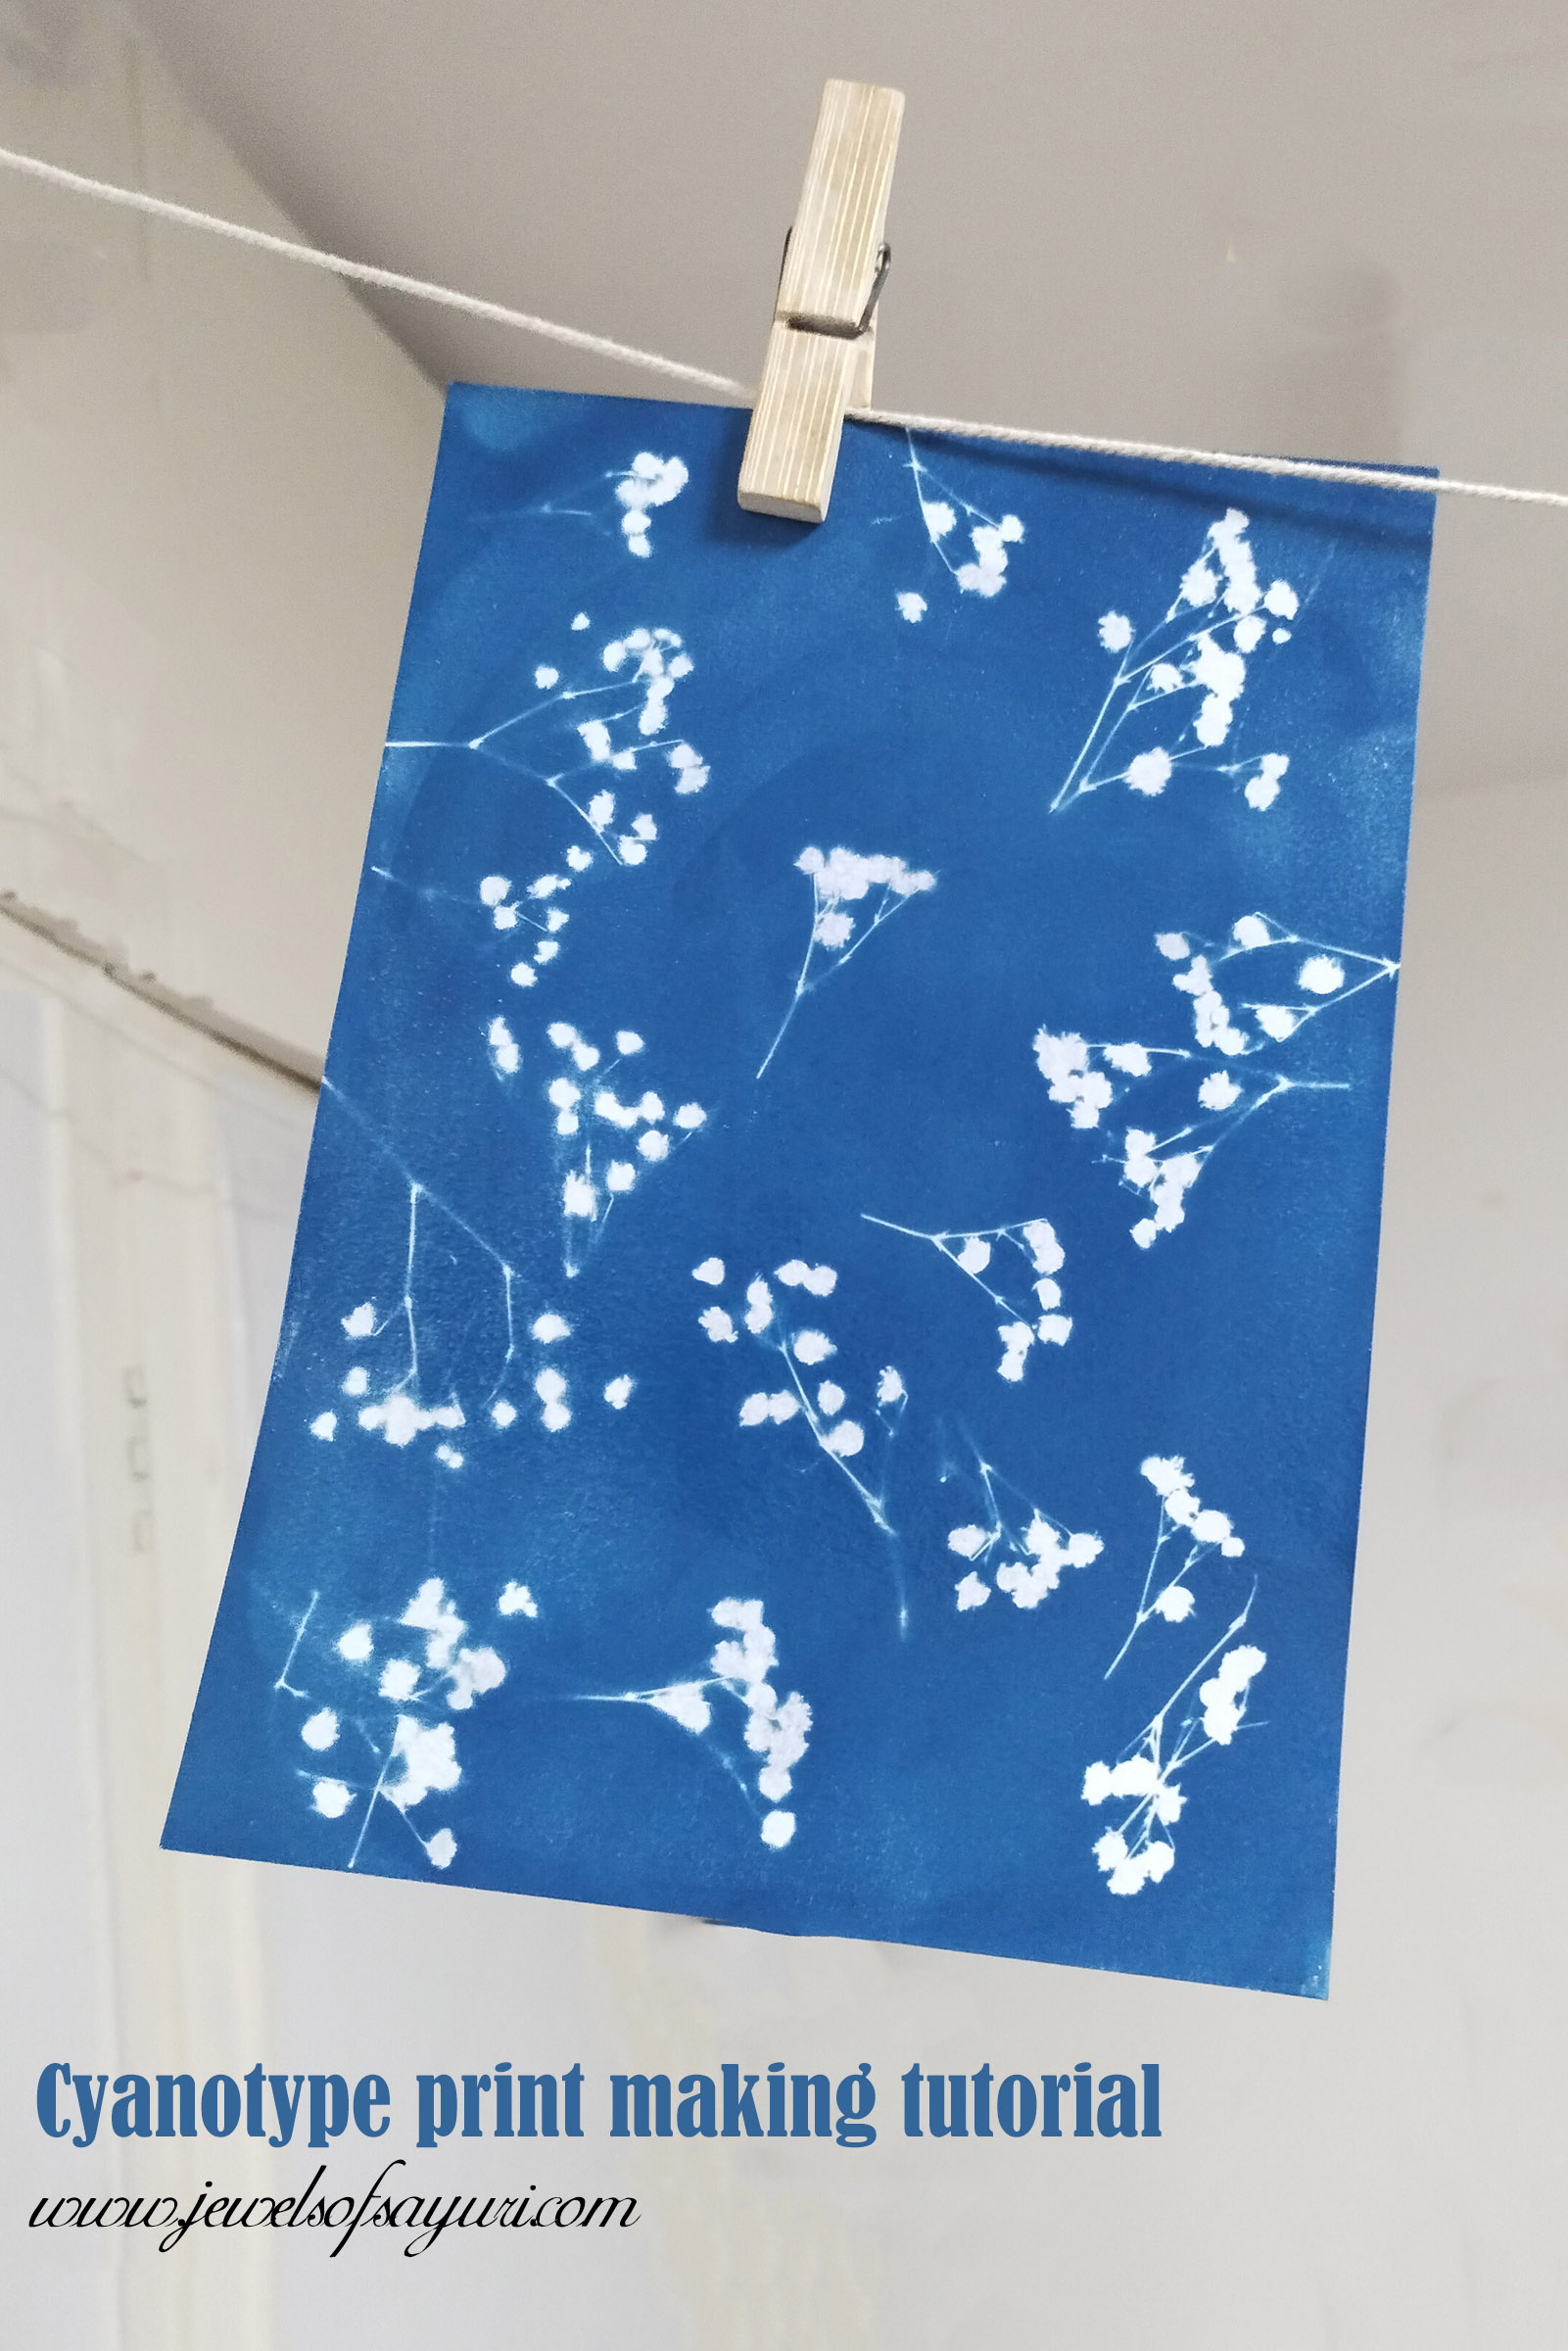 Bearly Art Cyanotype Kit - Solar Print Set for Photographic Printing on Paper An